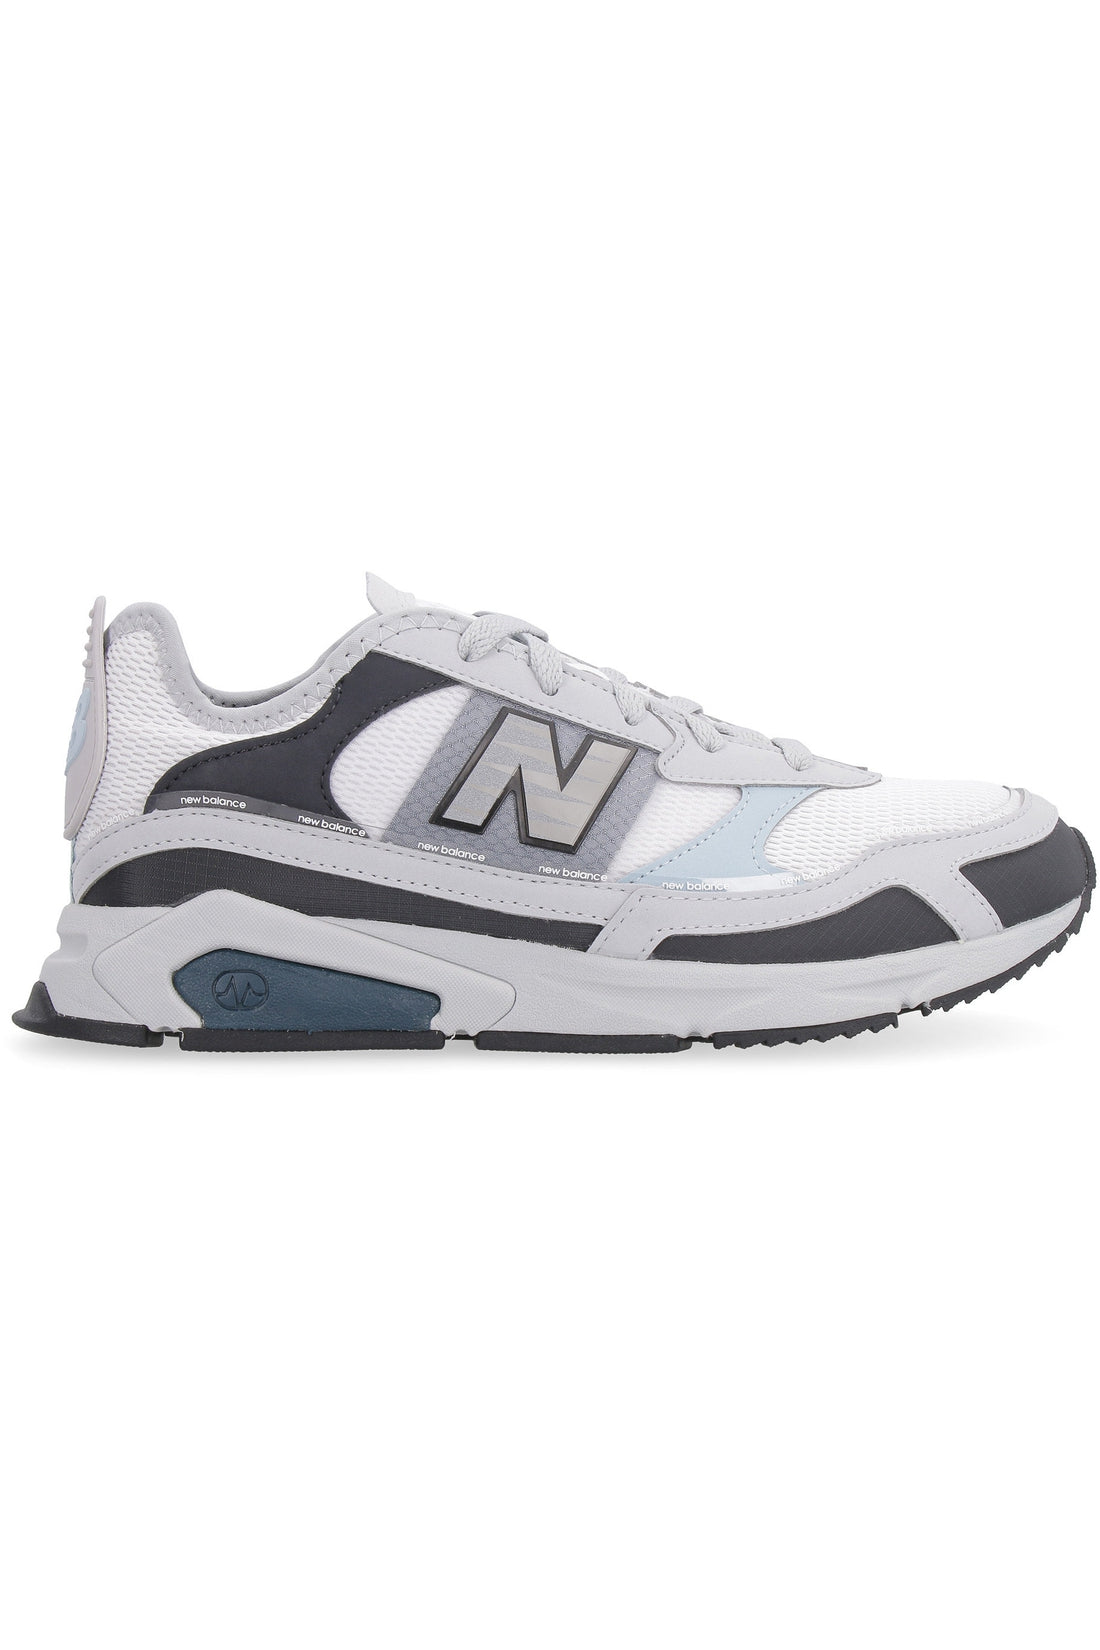 New Balance-OUTLET-SALE-X-Racer mesh sneakers-ARCHIVIST